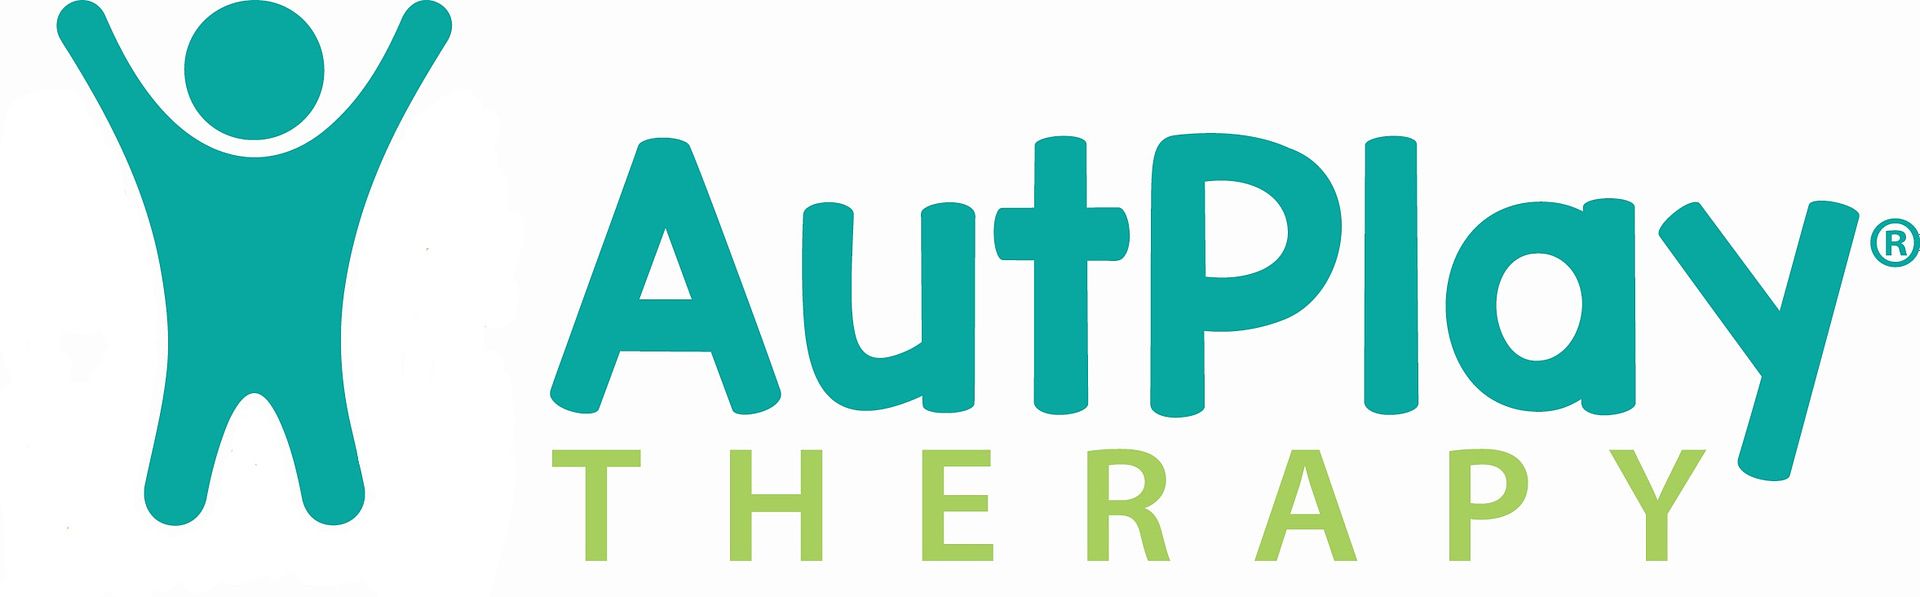 the logo for autplay therapy shows a person with their arms in the air .